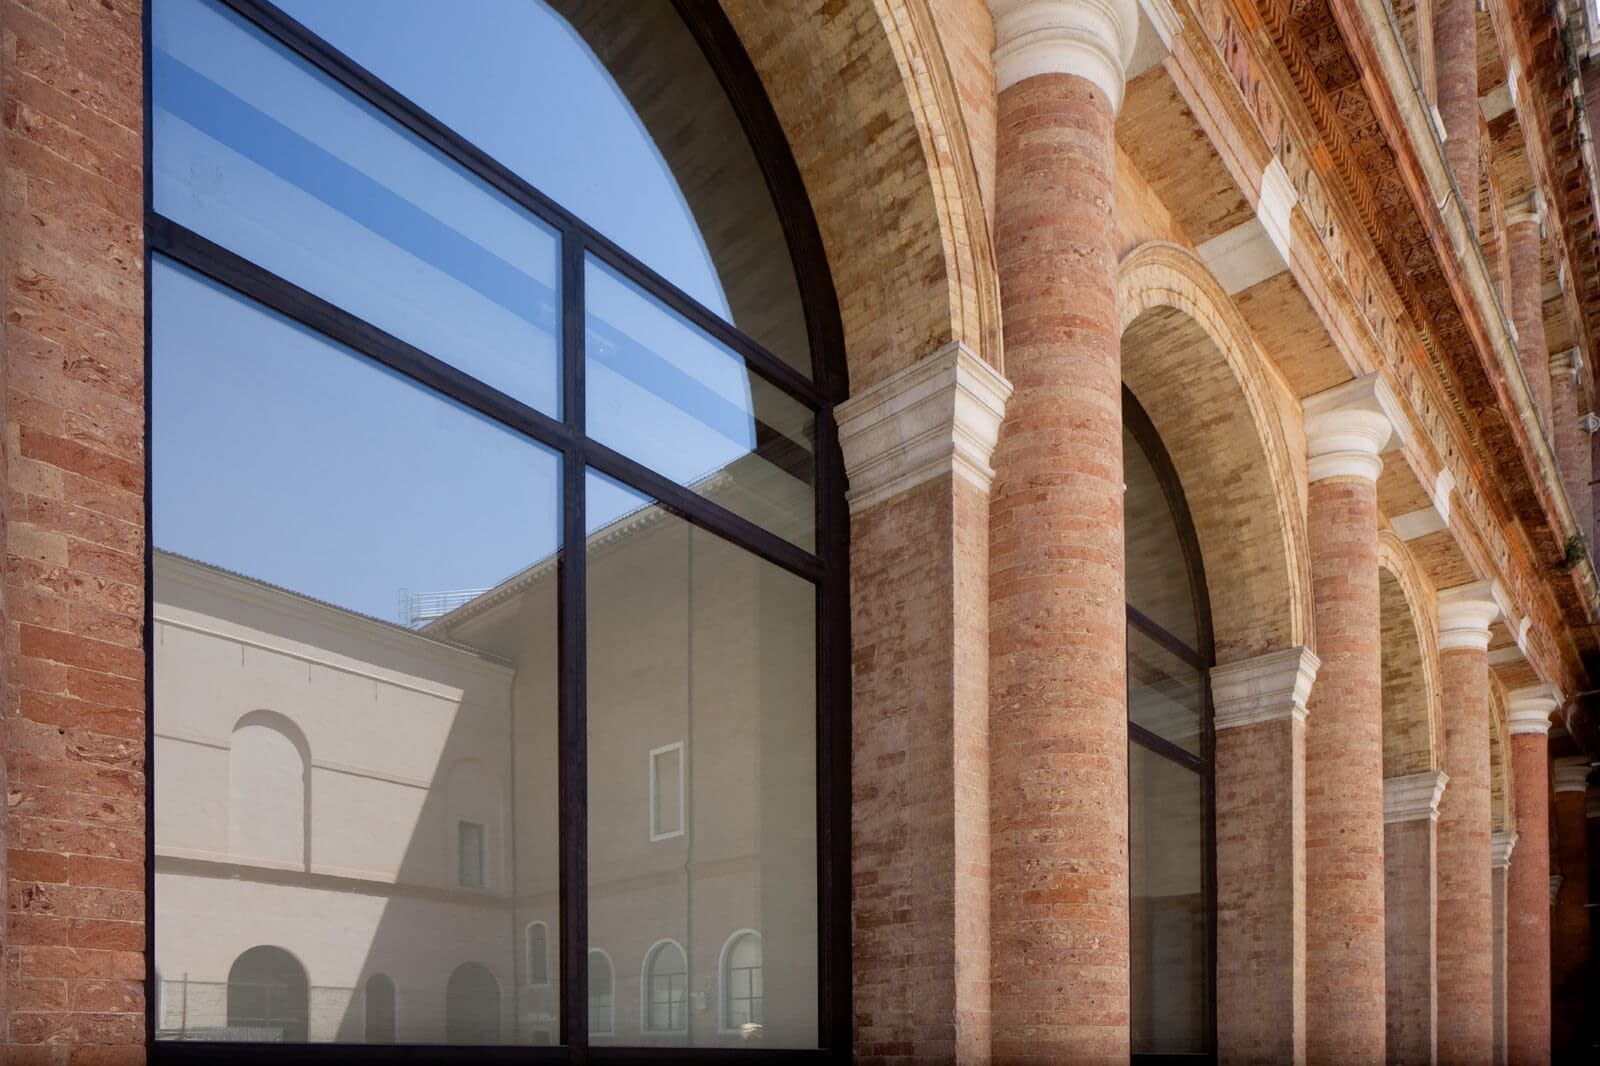 Minimal frame thermally broken burnished brass window systems by Brombal were chosen for the restoration of Gallerie Dell'accademia